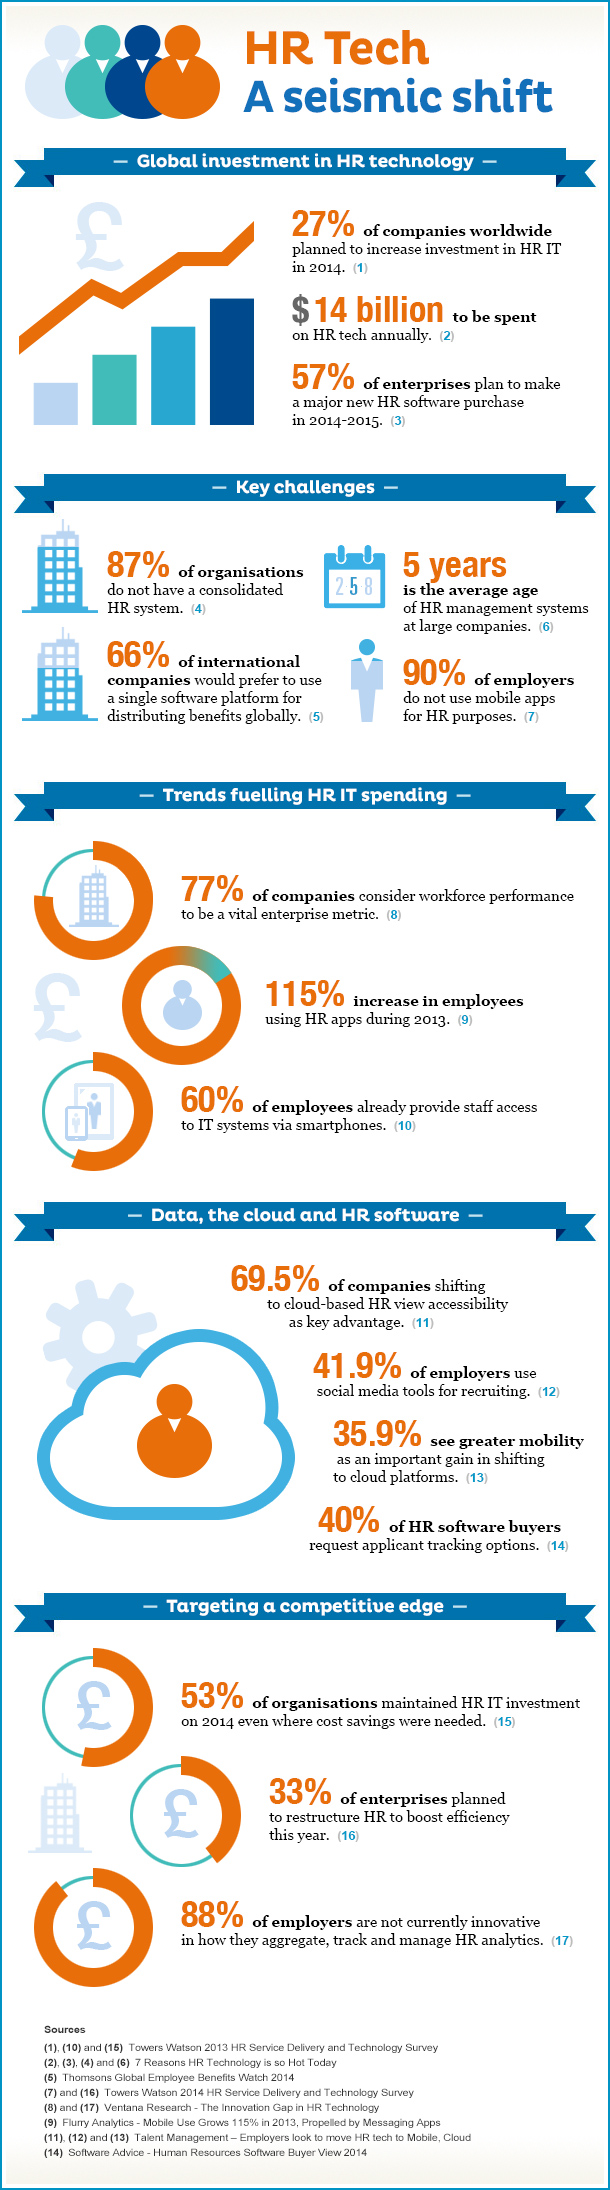 IBI_Infographic about HR Tech